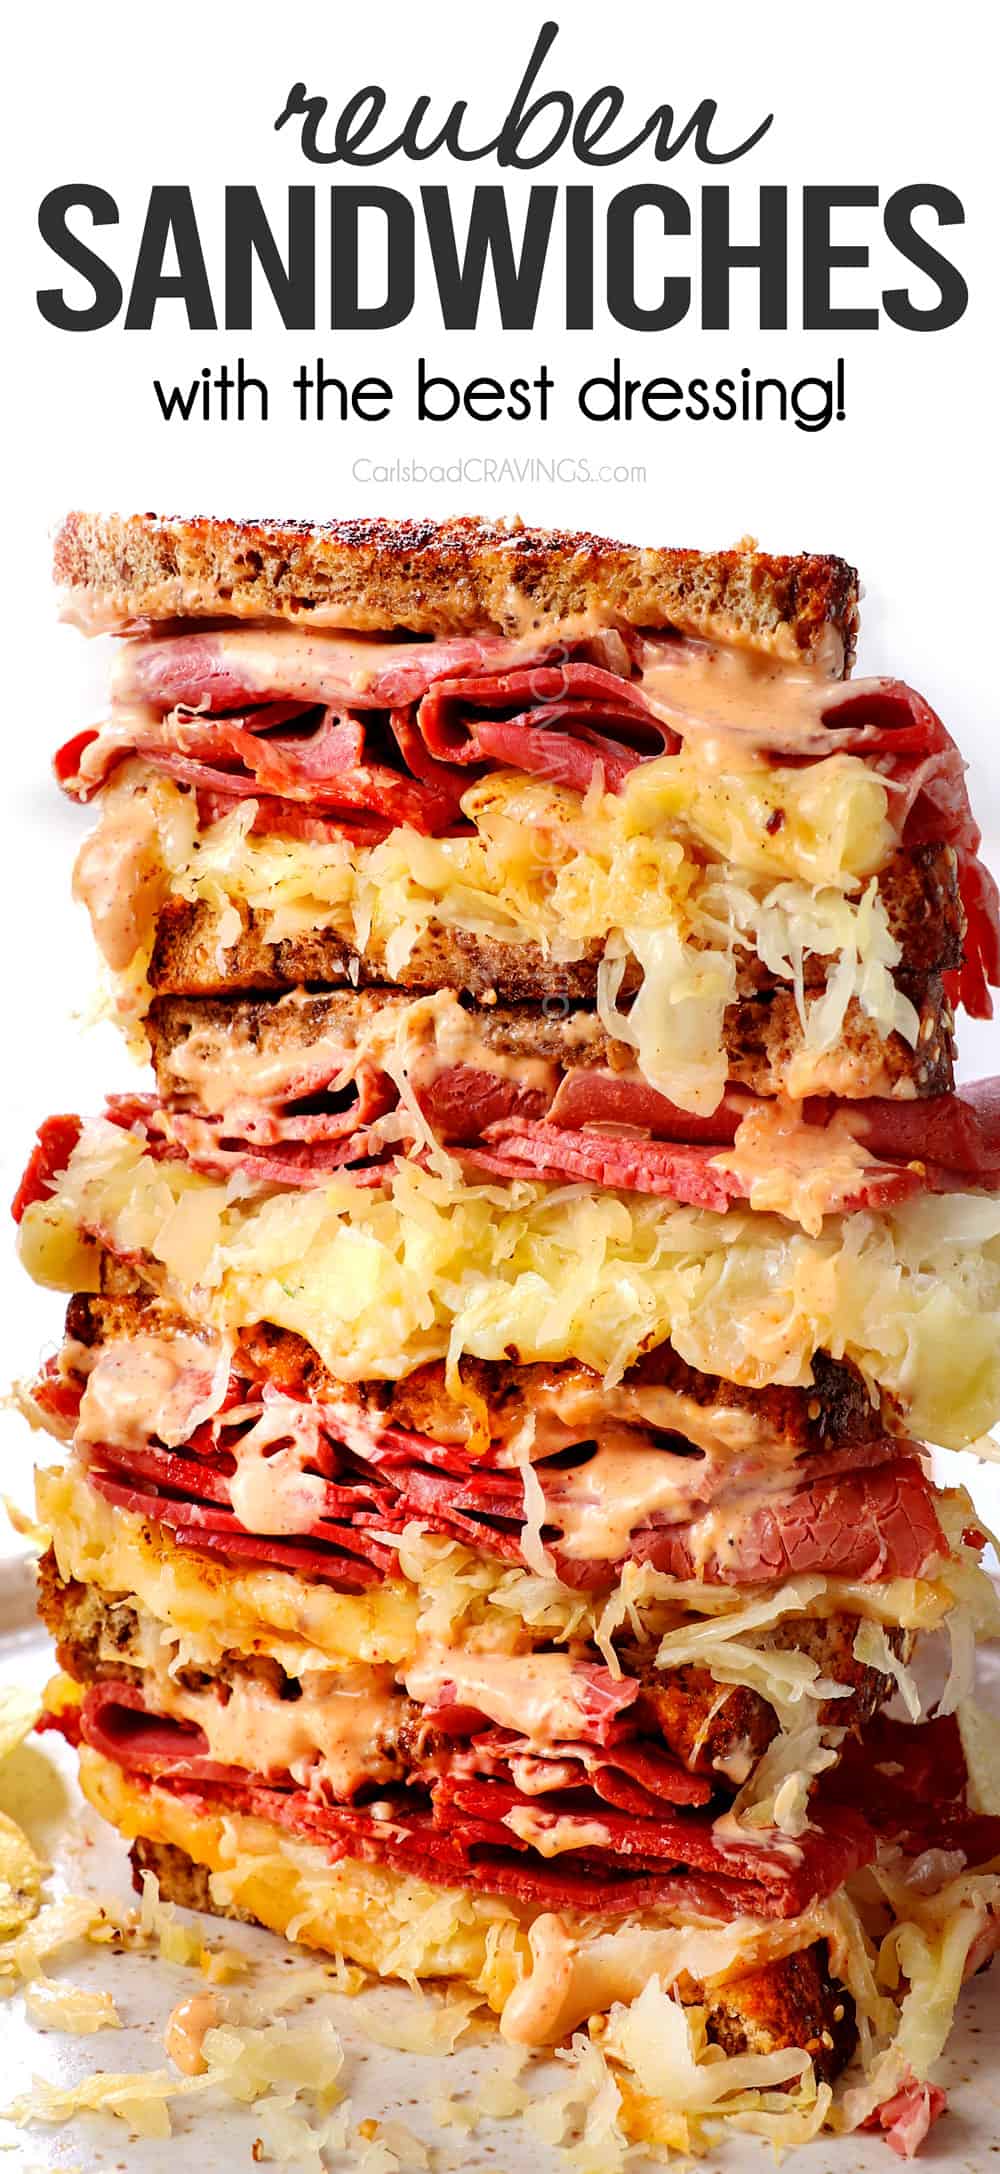 a stack of Reuben Sandwich slices with Russian dressing, corned beef, Swiss cheese and coleslaw on rye bread